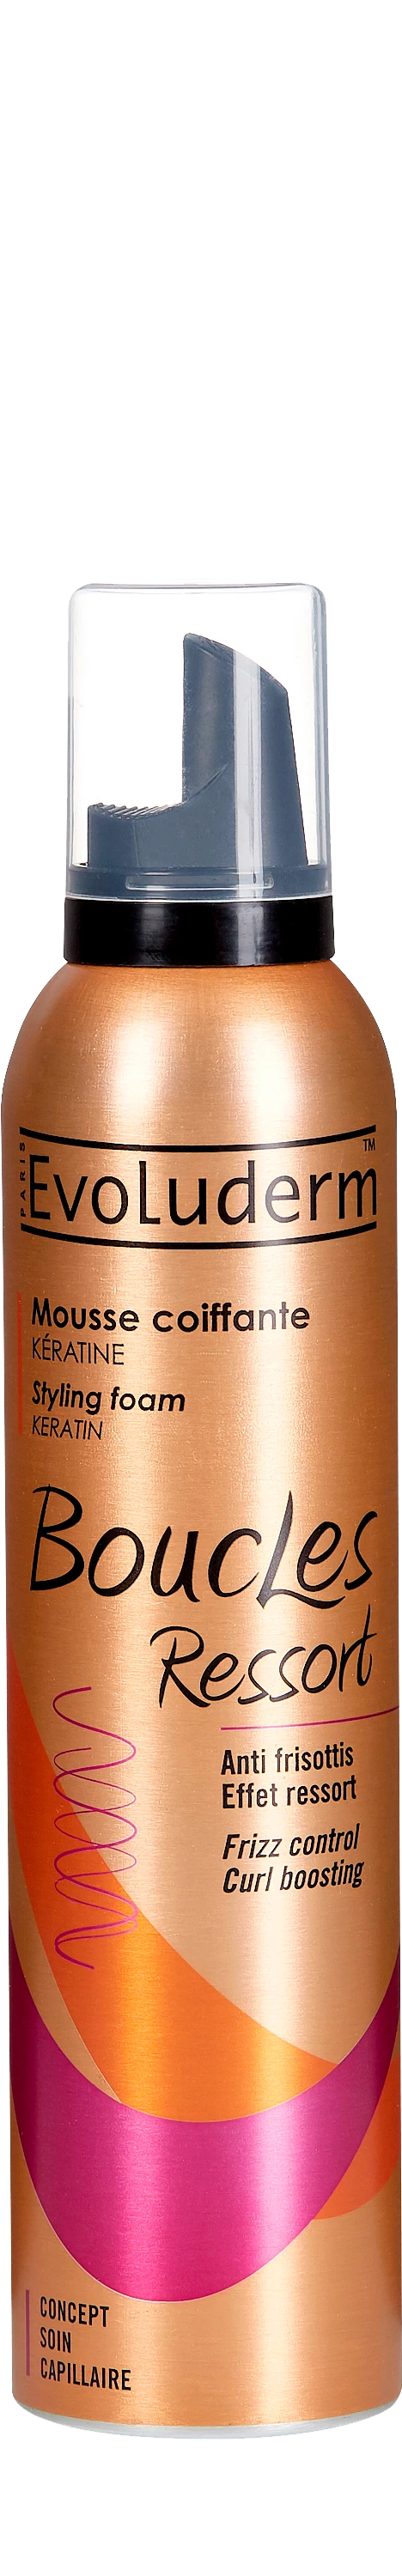 Curl Styling Mousse, 250ml - EVOLUDERM